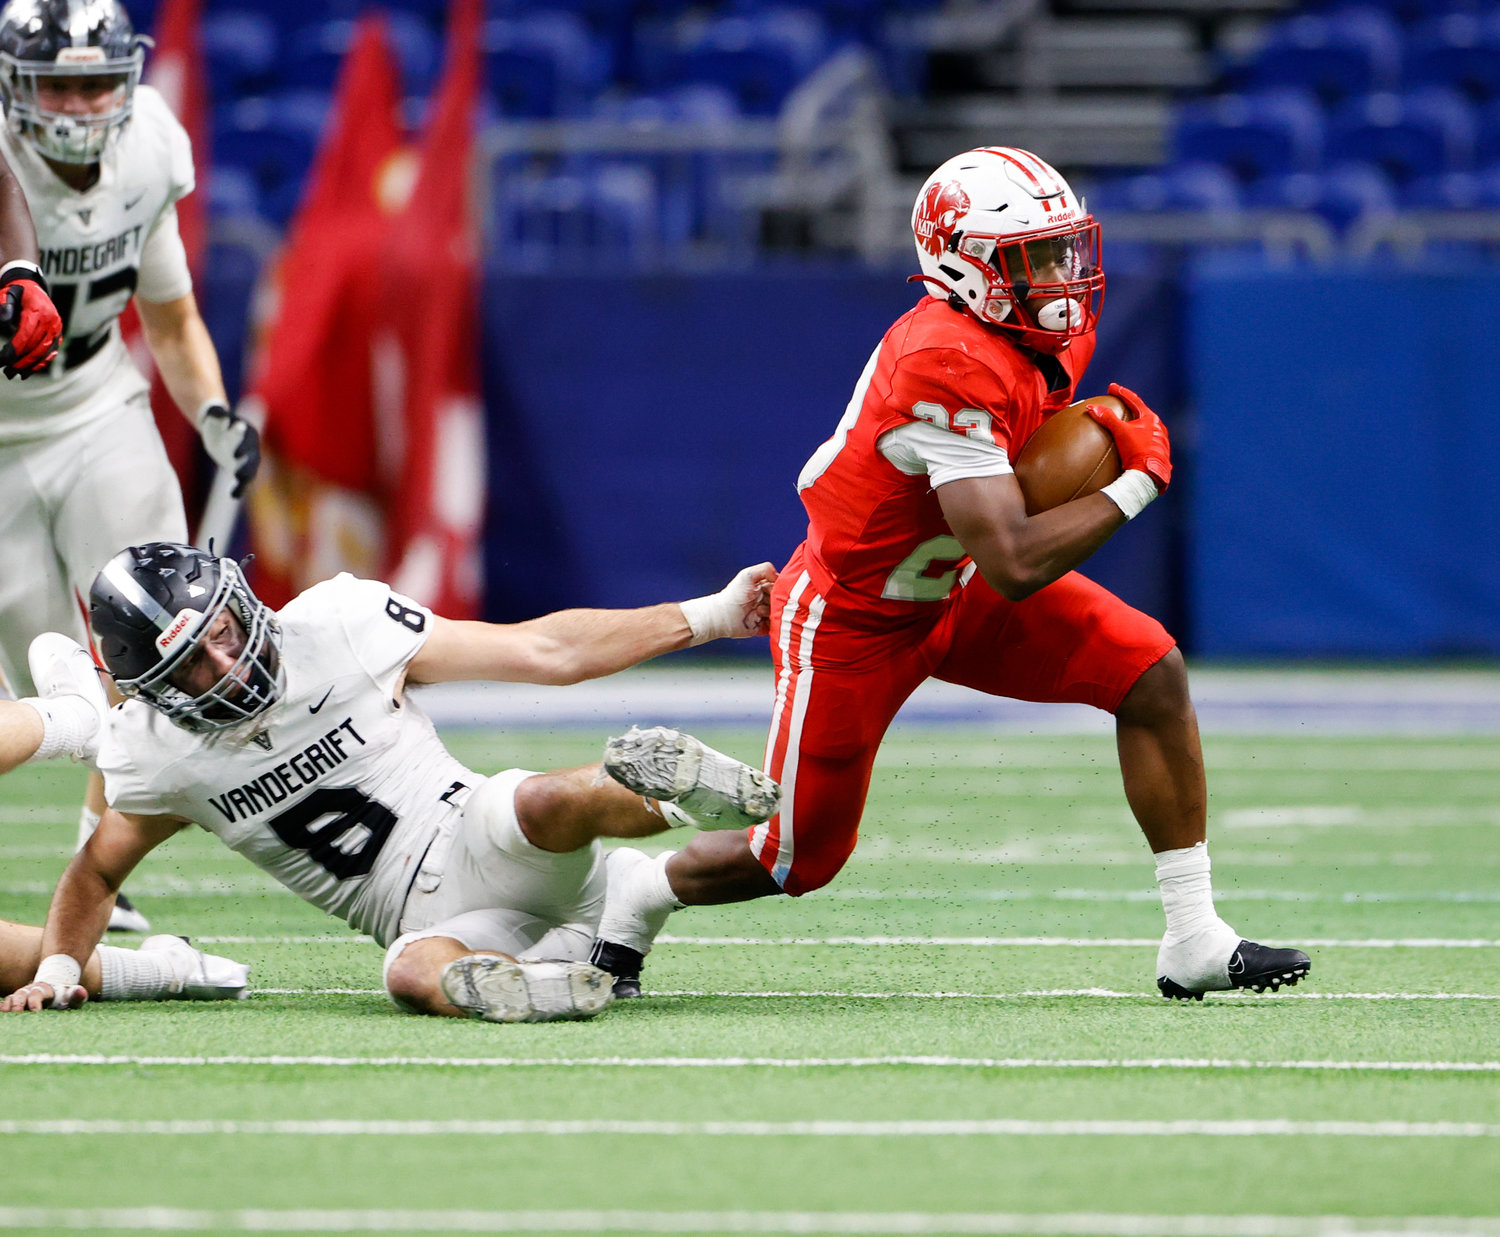 Katy running back Seth Davis (23) breaks a tackle attempt by Vandegrift Vipers junior defensive back Alex Foster (8) on a carry during the Class 6A-DII state semifinal football game between Katy and Vandegrift on Dec. 10, 2022 in San Antonio.